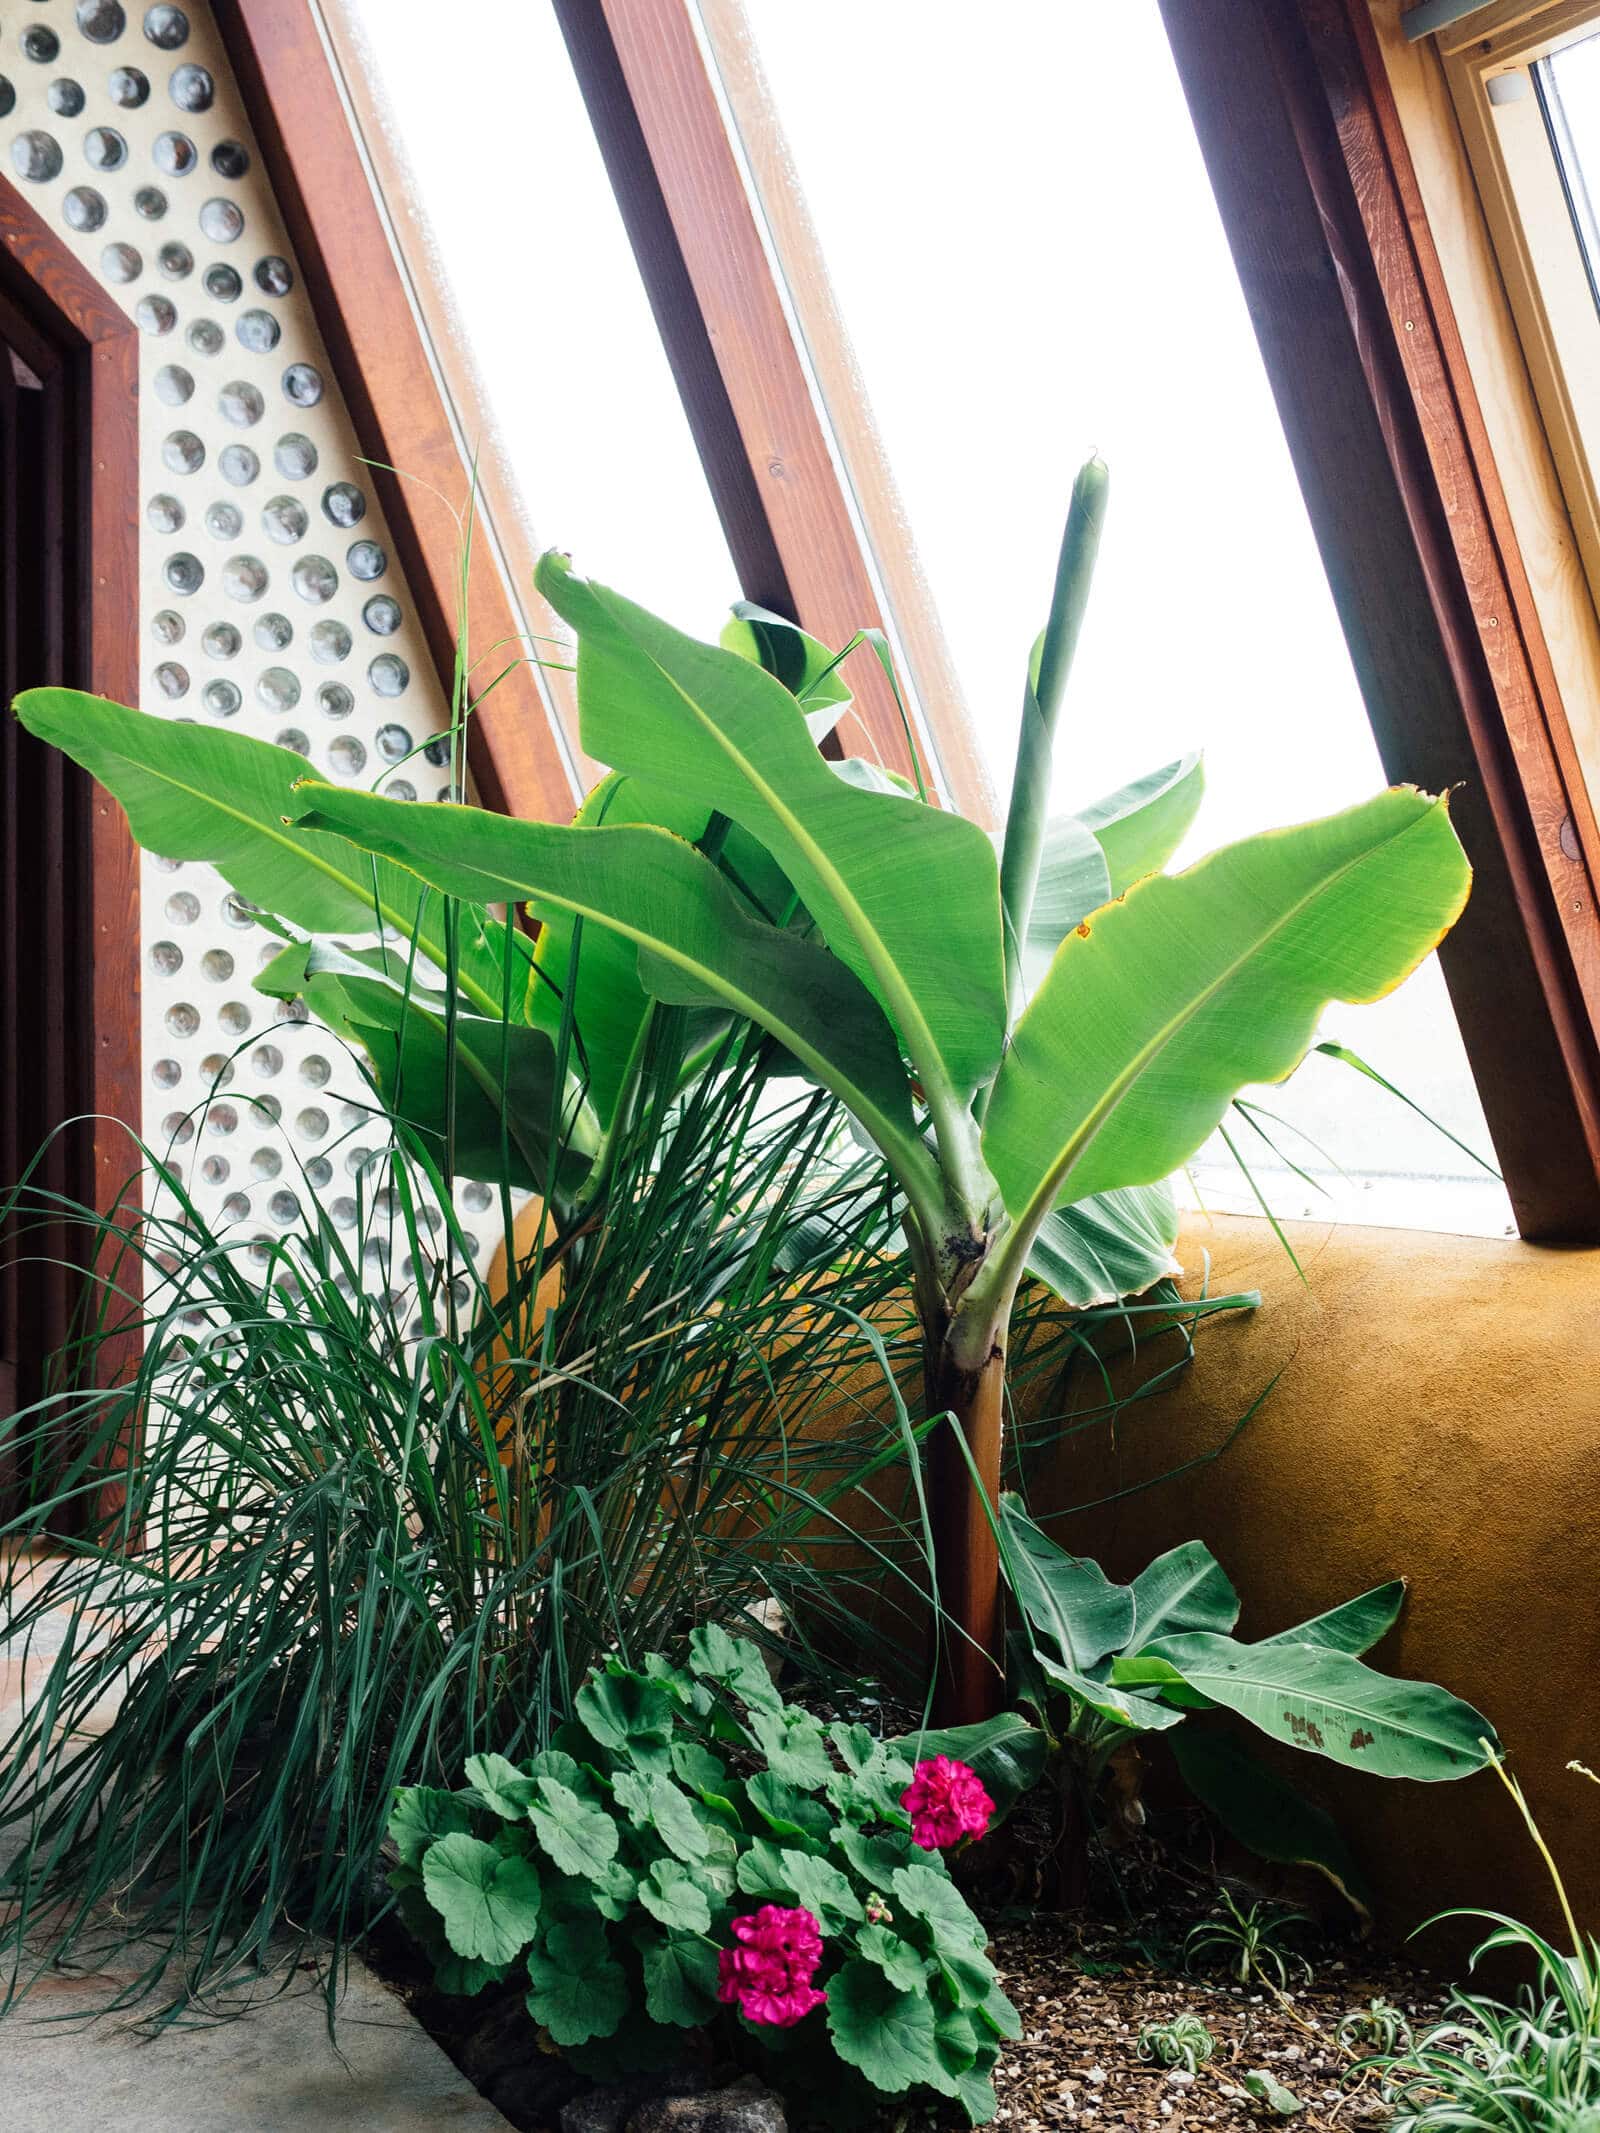 Banana plants and flowers in an Earthship greenhouse